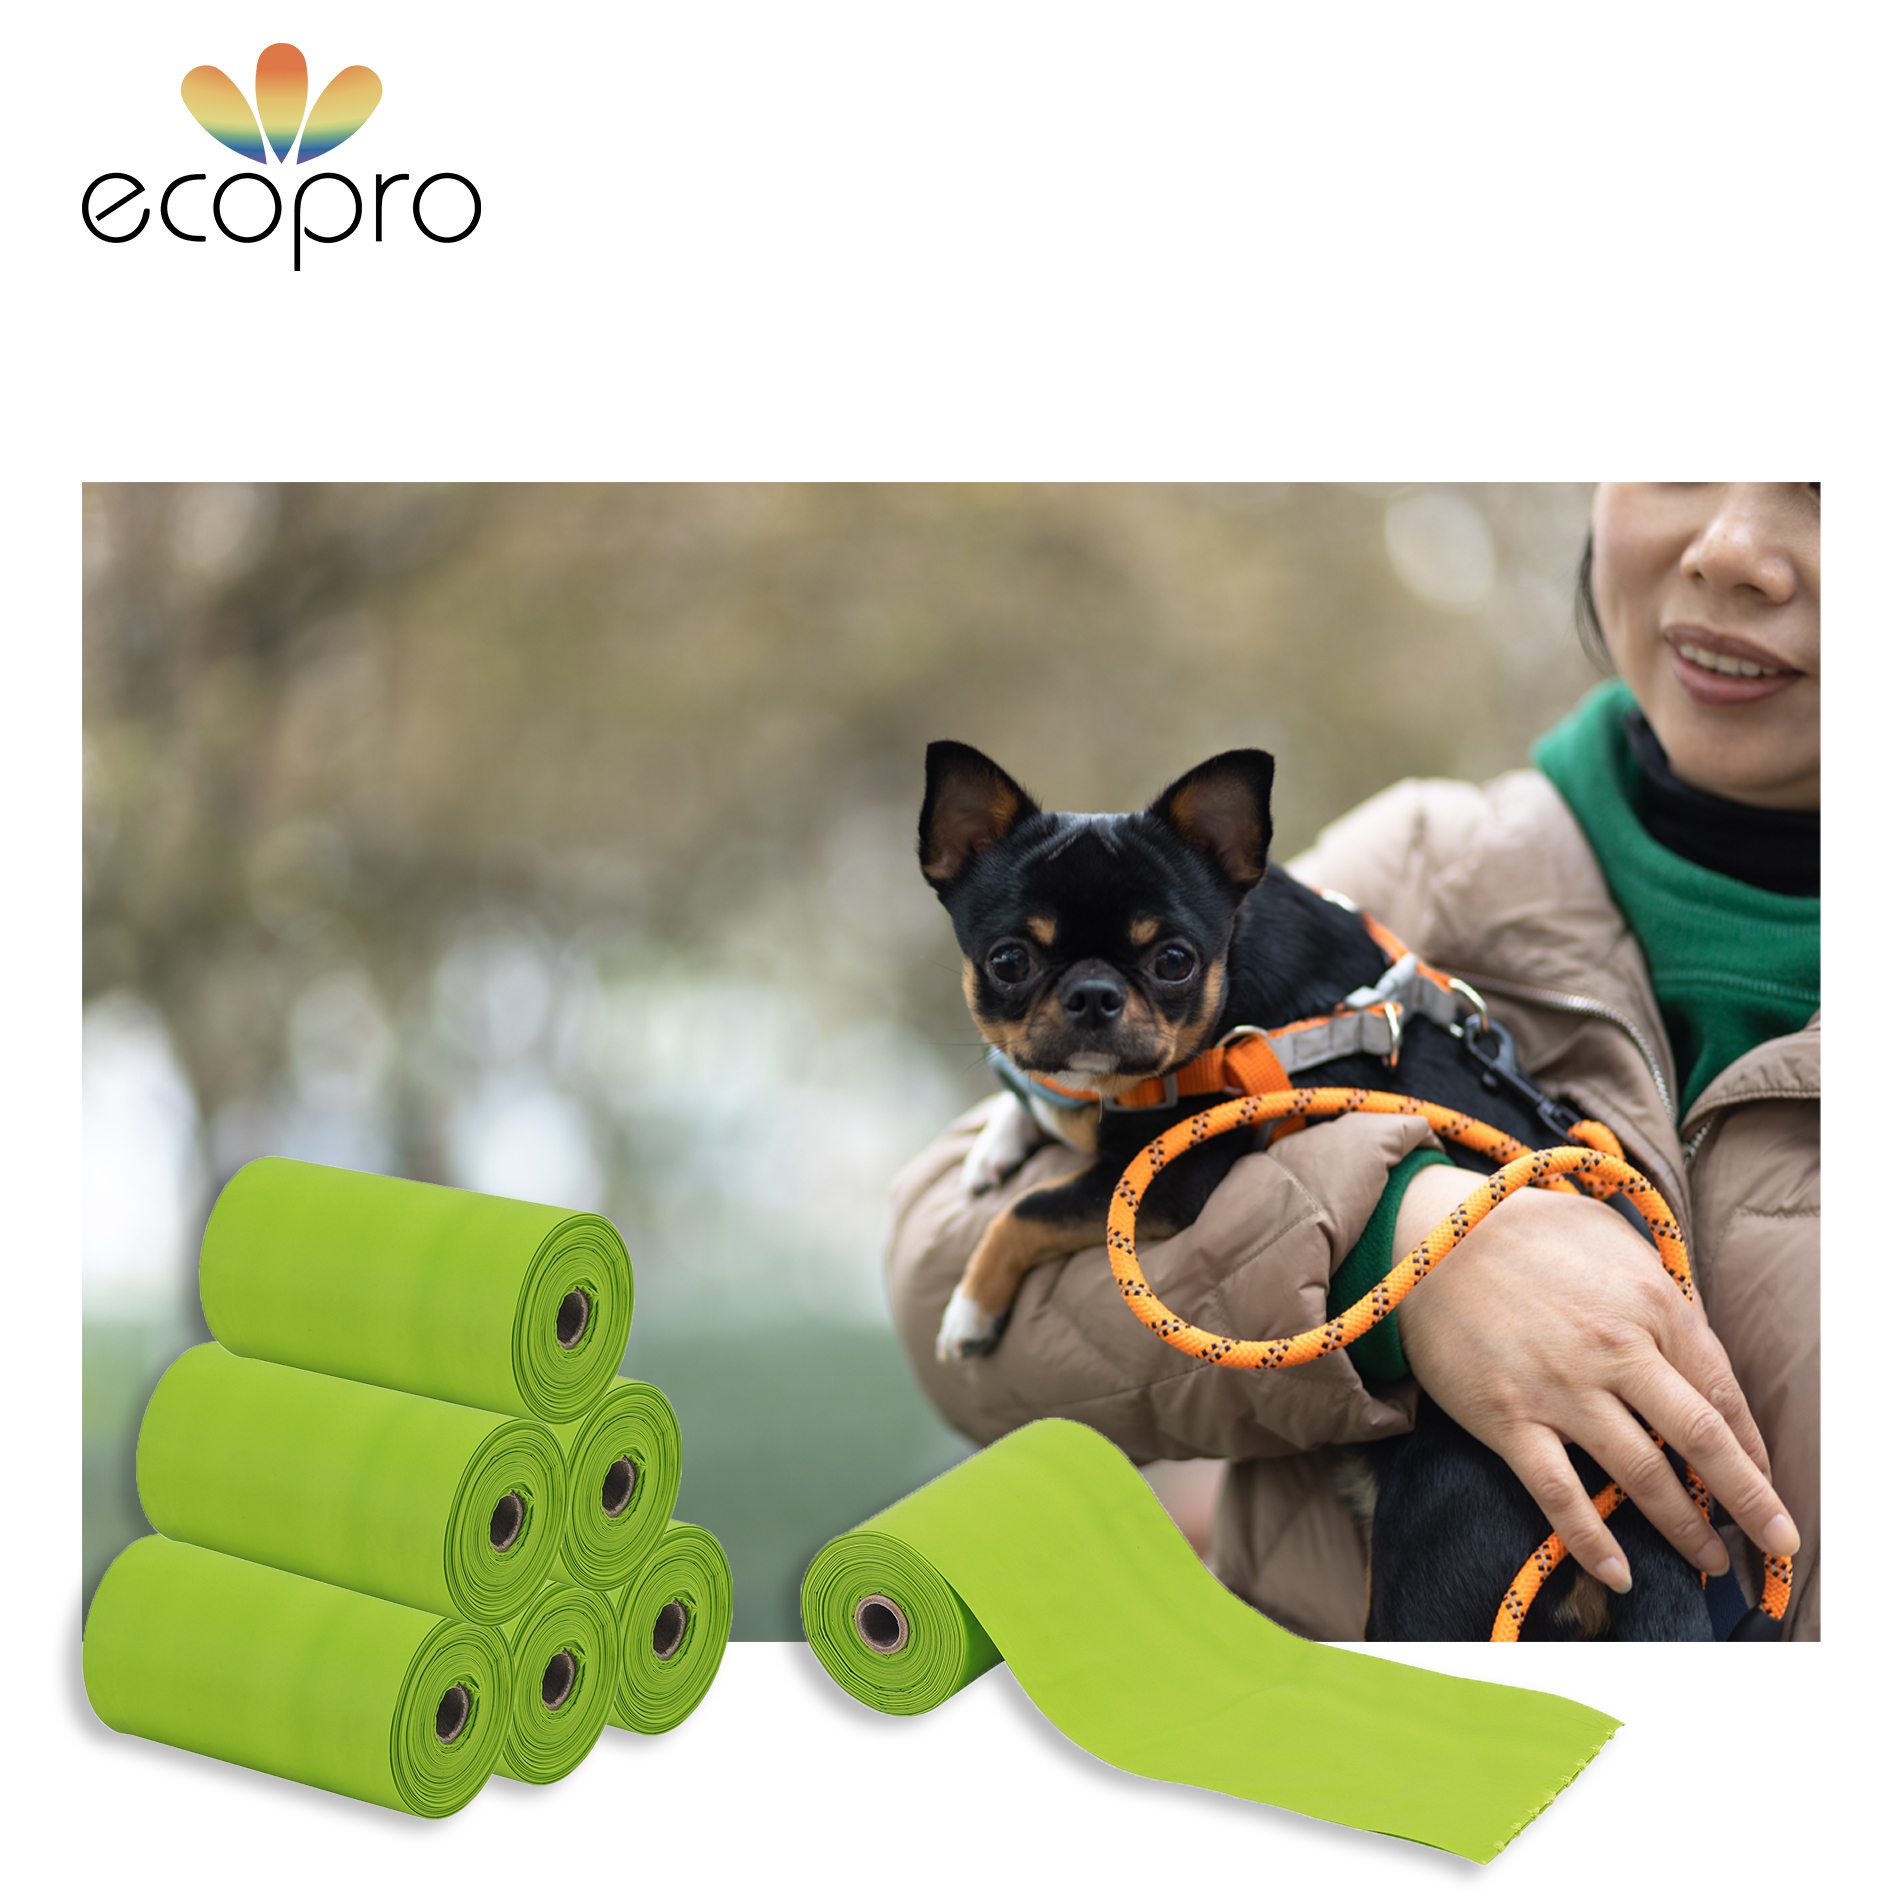 Pet Waste Bag on Roll Pet Waste Collection Featured Image